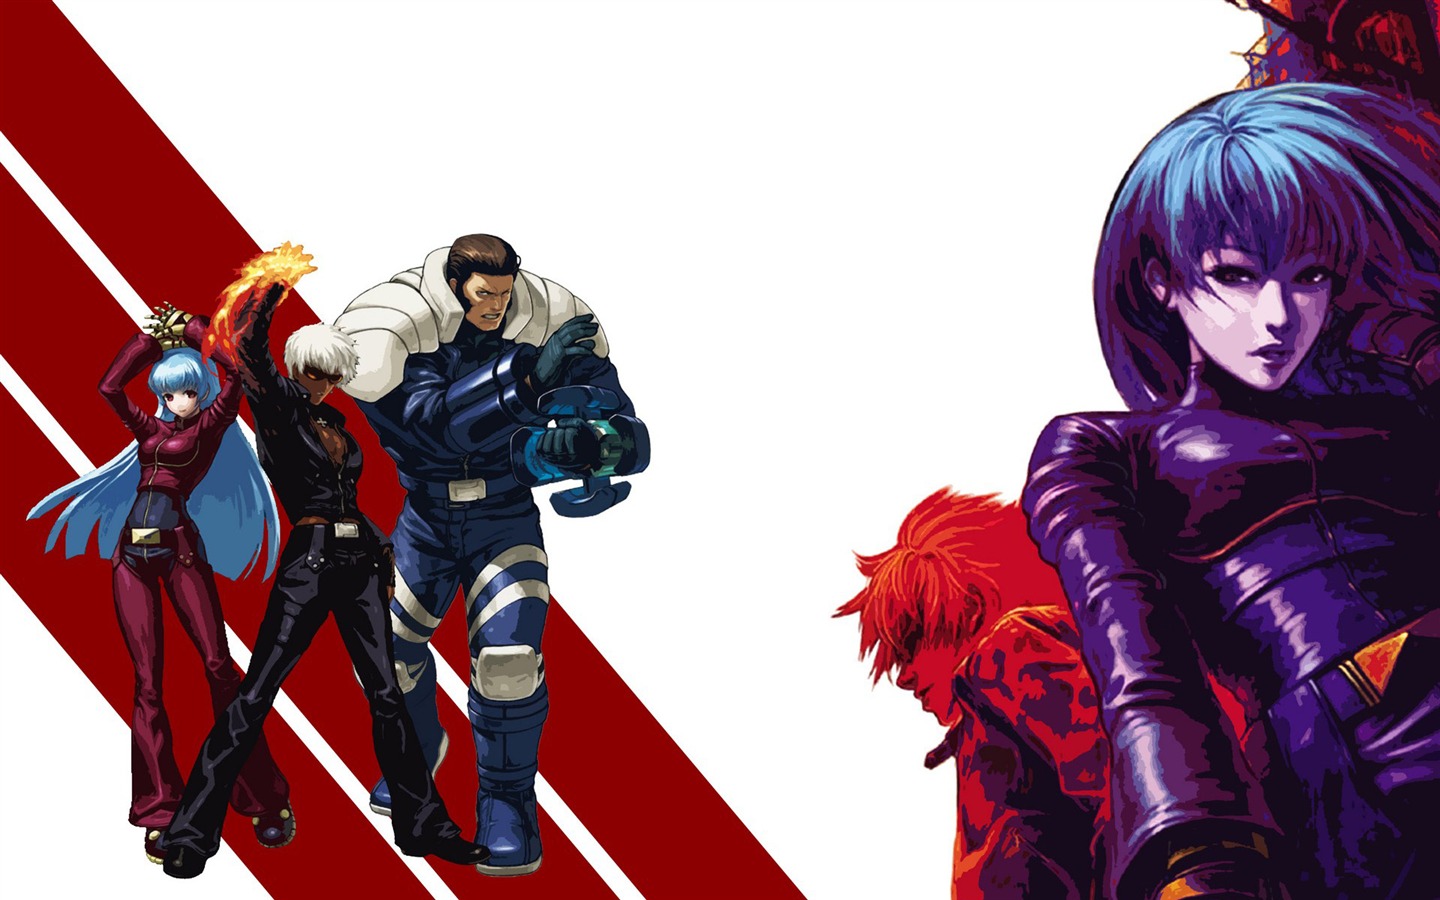 The King of Fighters XIII wallpapers #5 - 1440x900